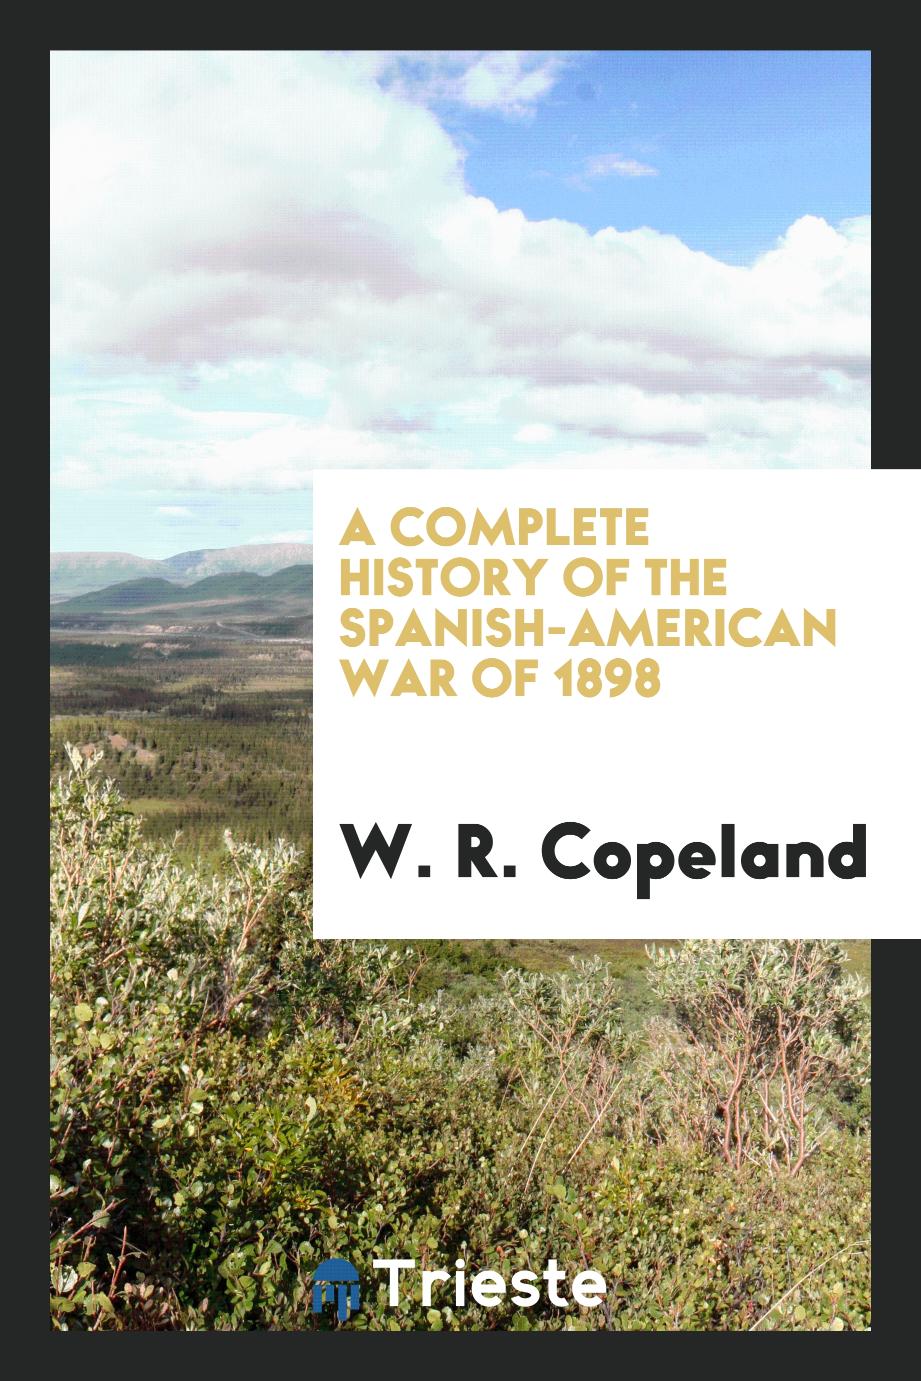 A Complete History of the Spanish-American War of 1898